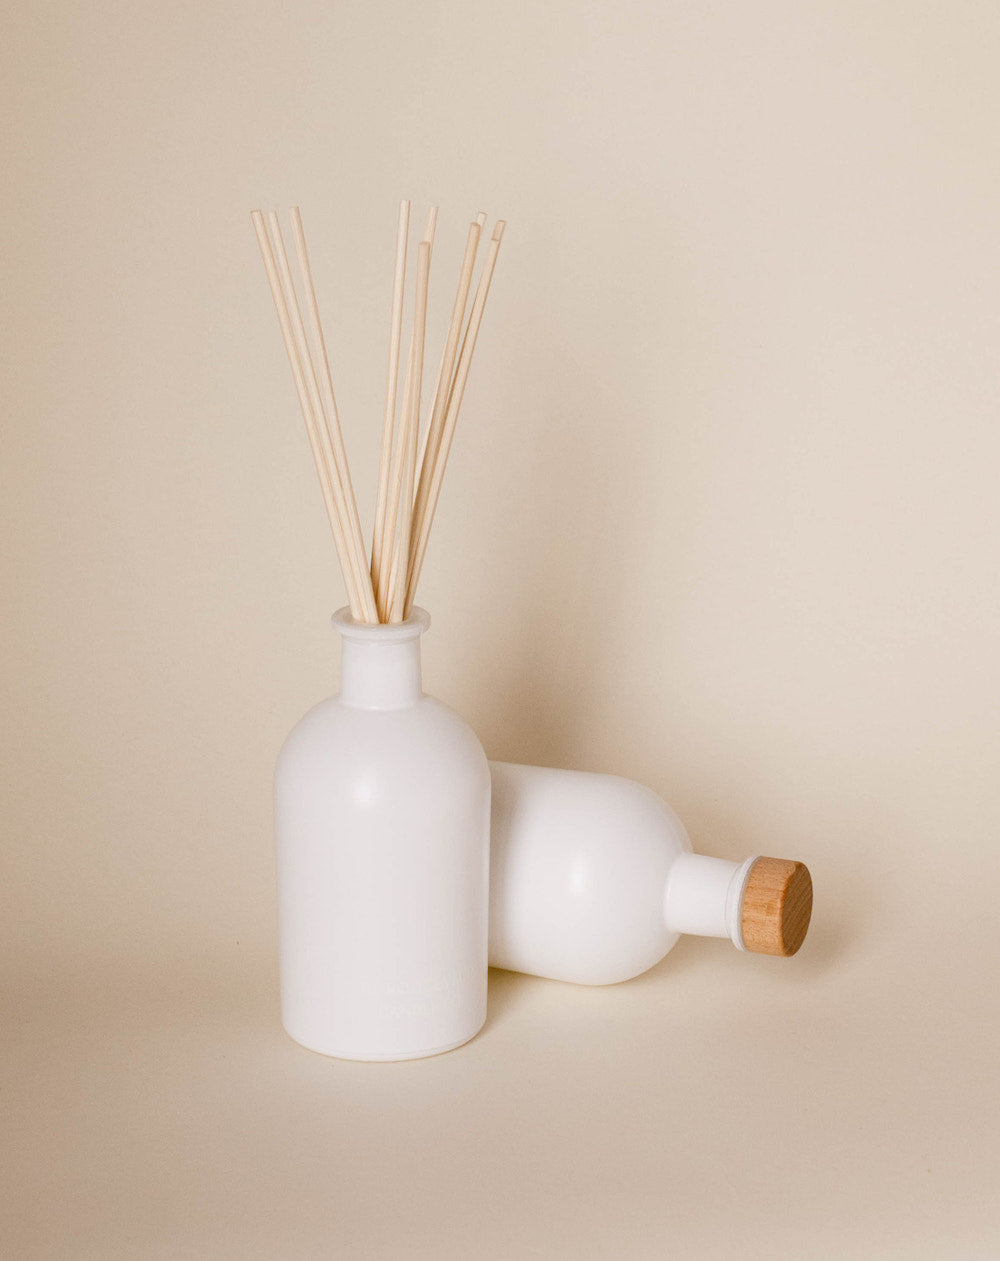 Grand Teton Reed Diffuser - The Roosevelts Candle Co.